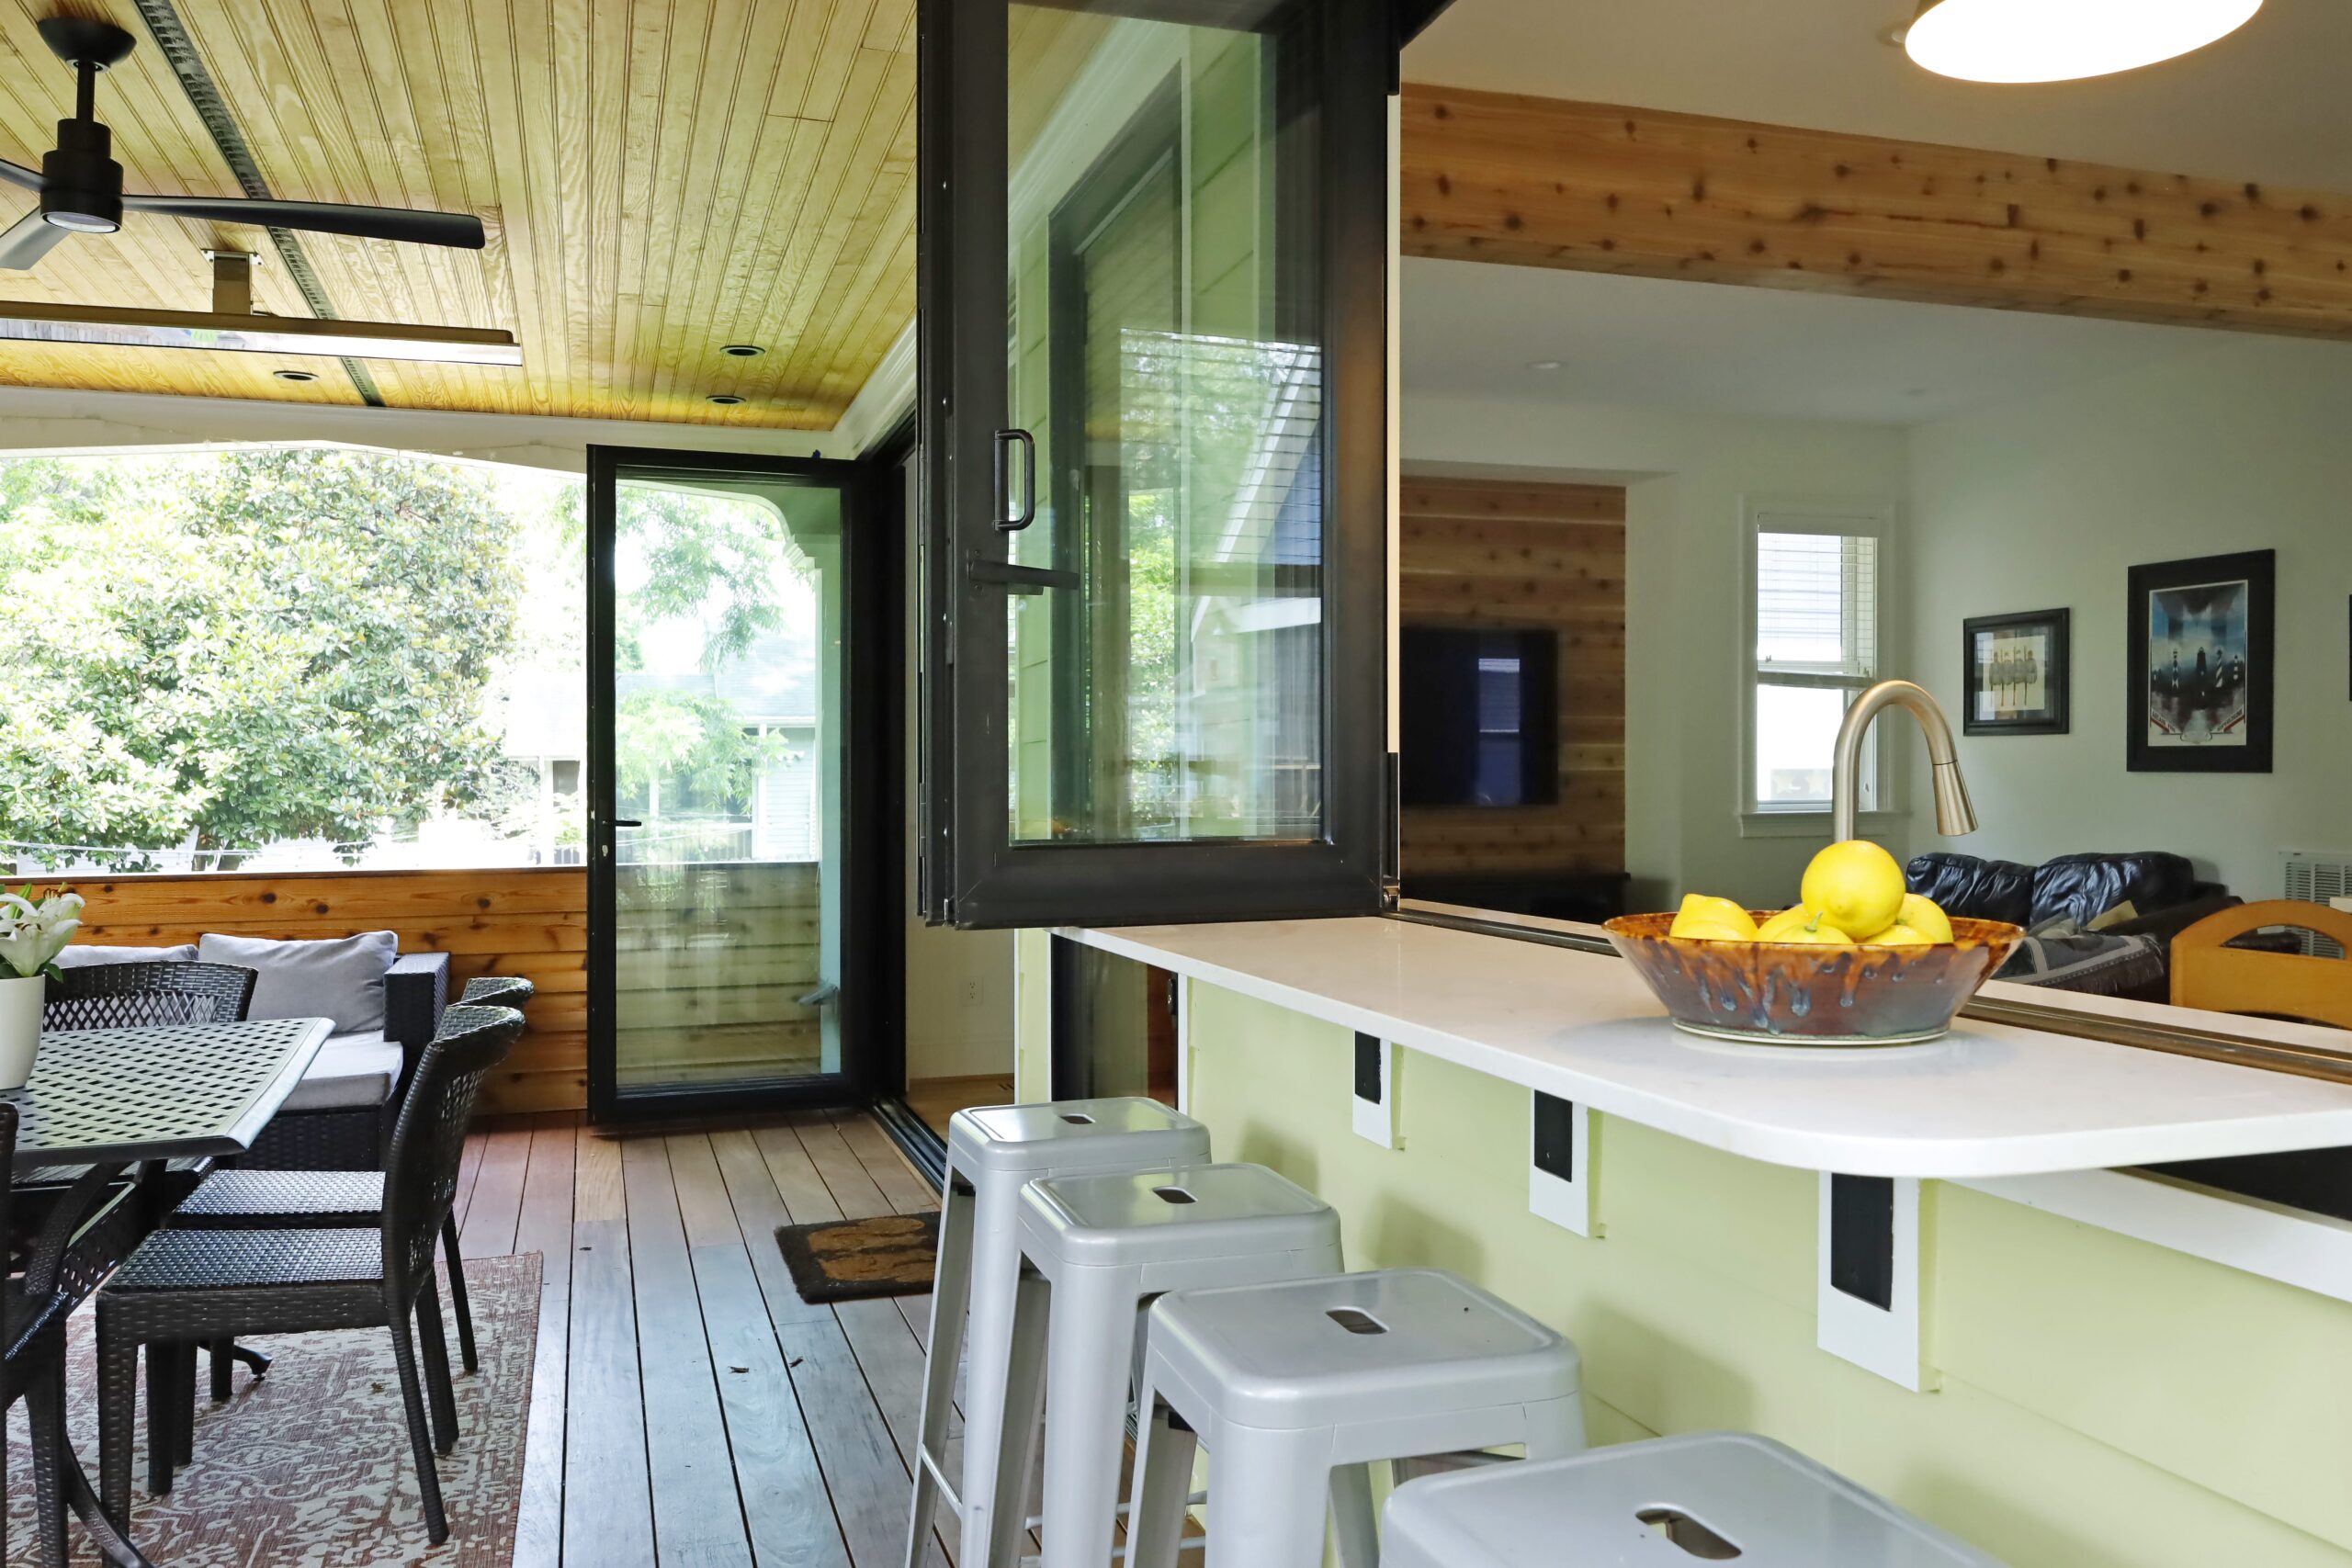 Accordion-style windows above the kitchen sink open up to the covered porch with a view overlooking the back yard.